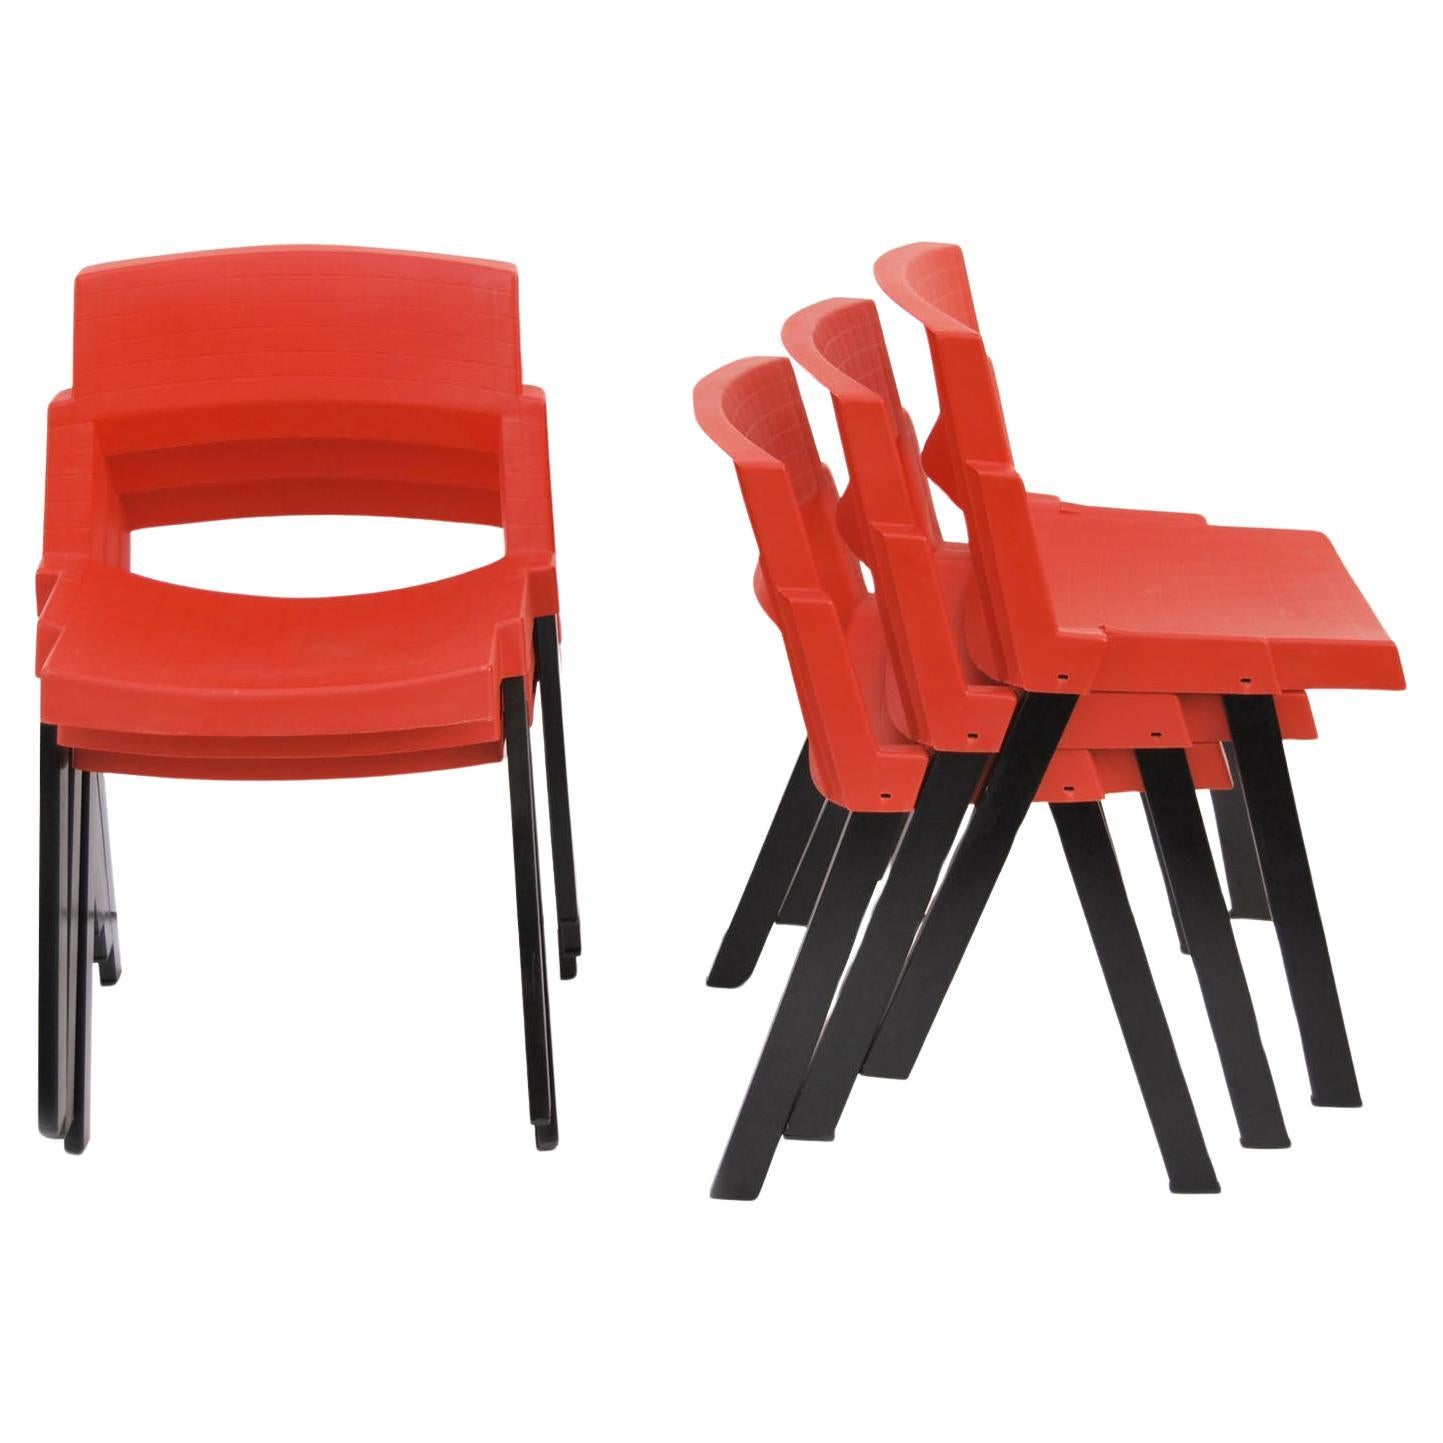 Six red and black CITY dining chairs by Lucci & Orlandini for Lamm  For Sale